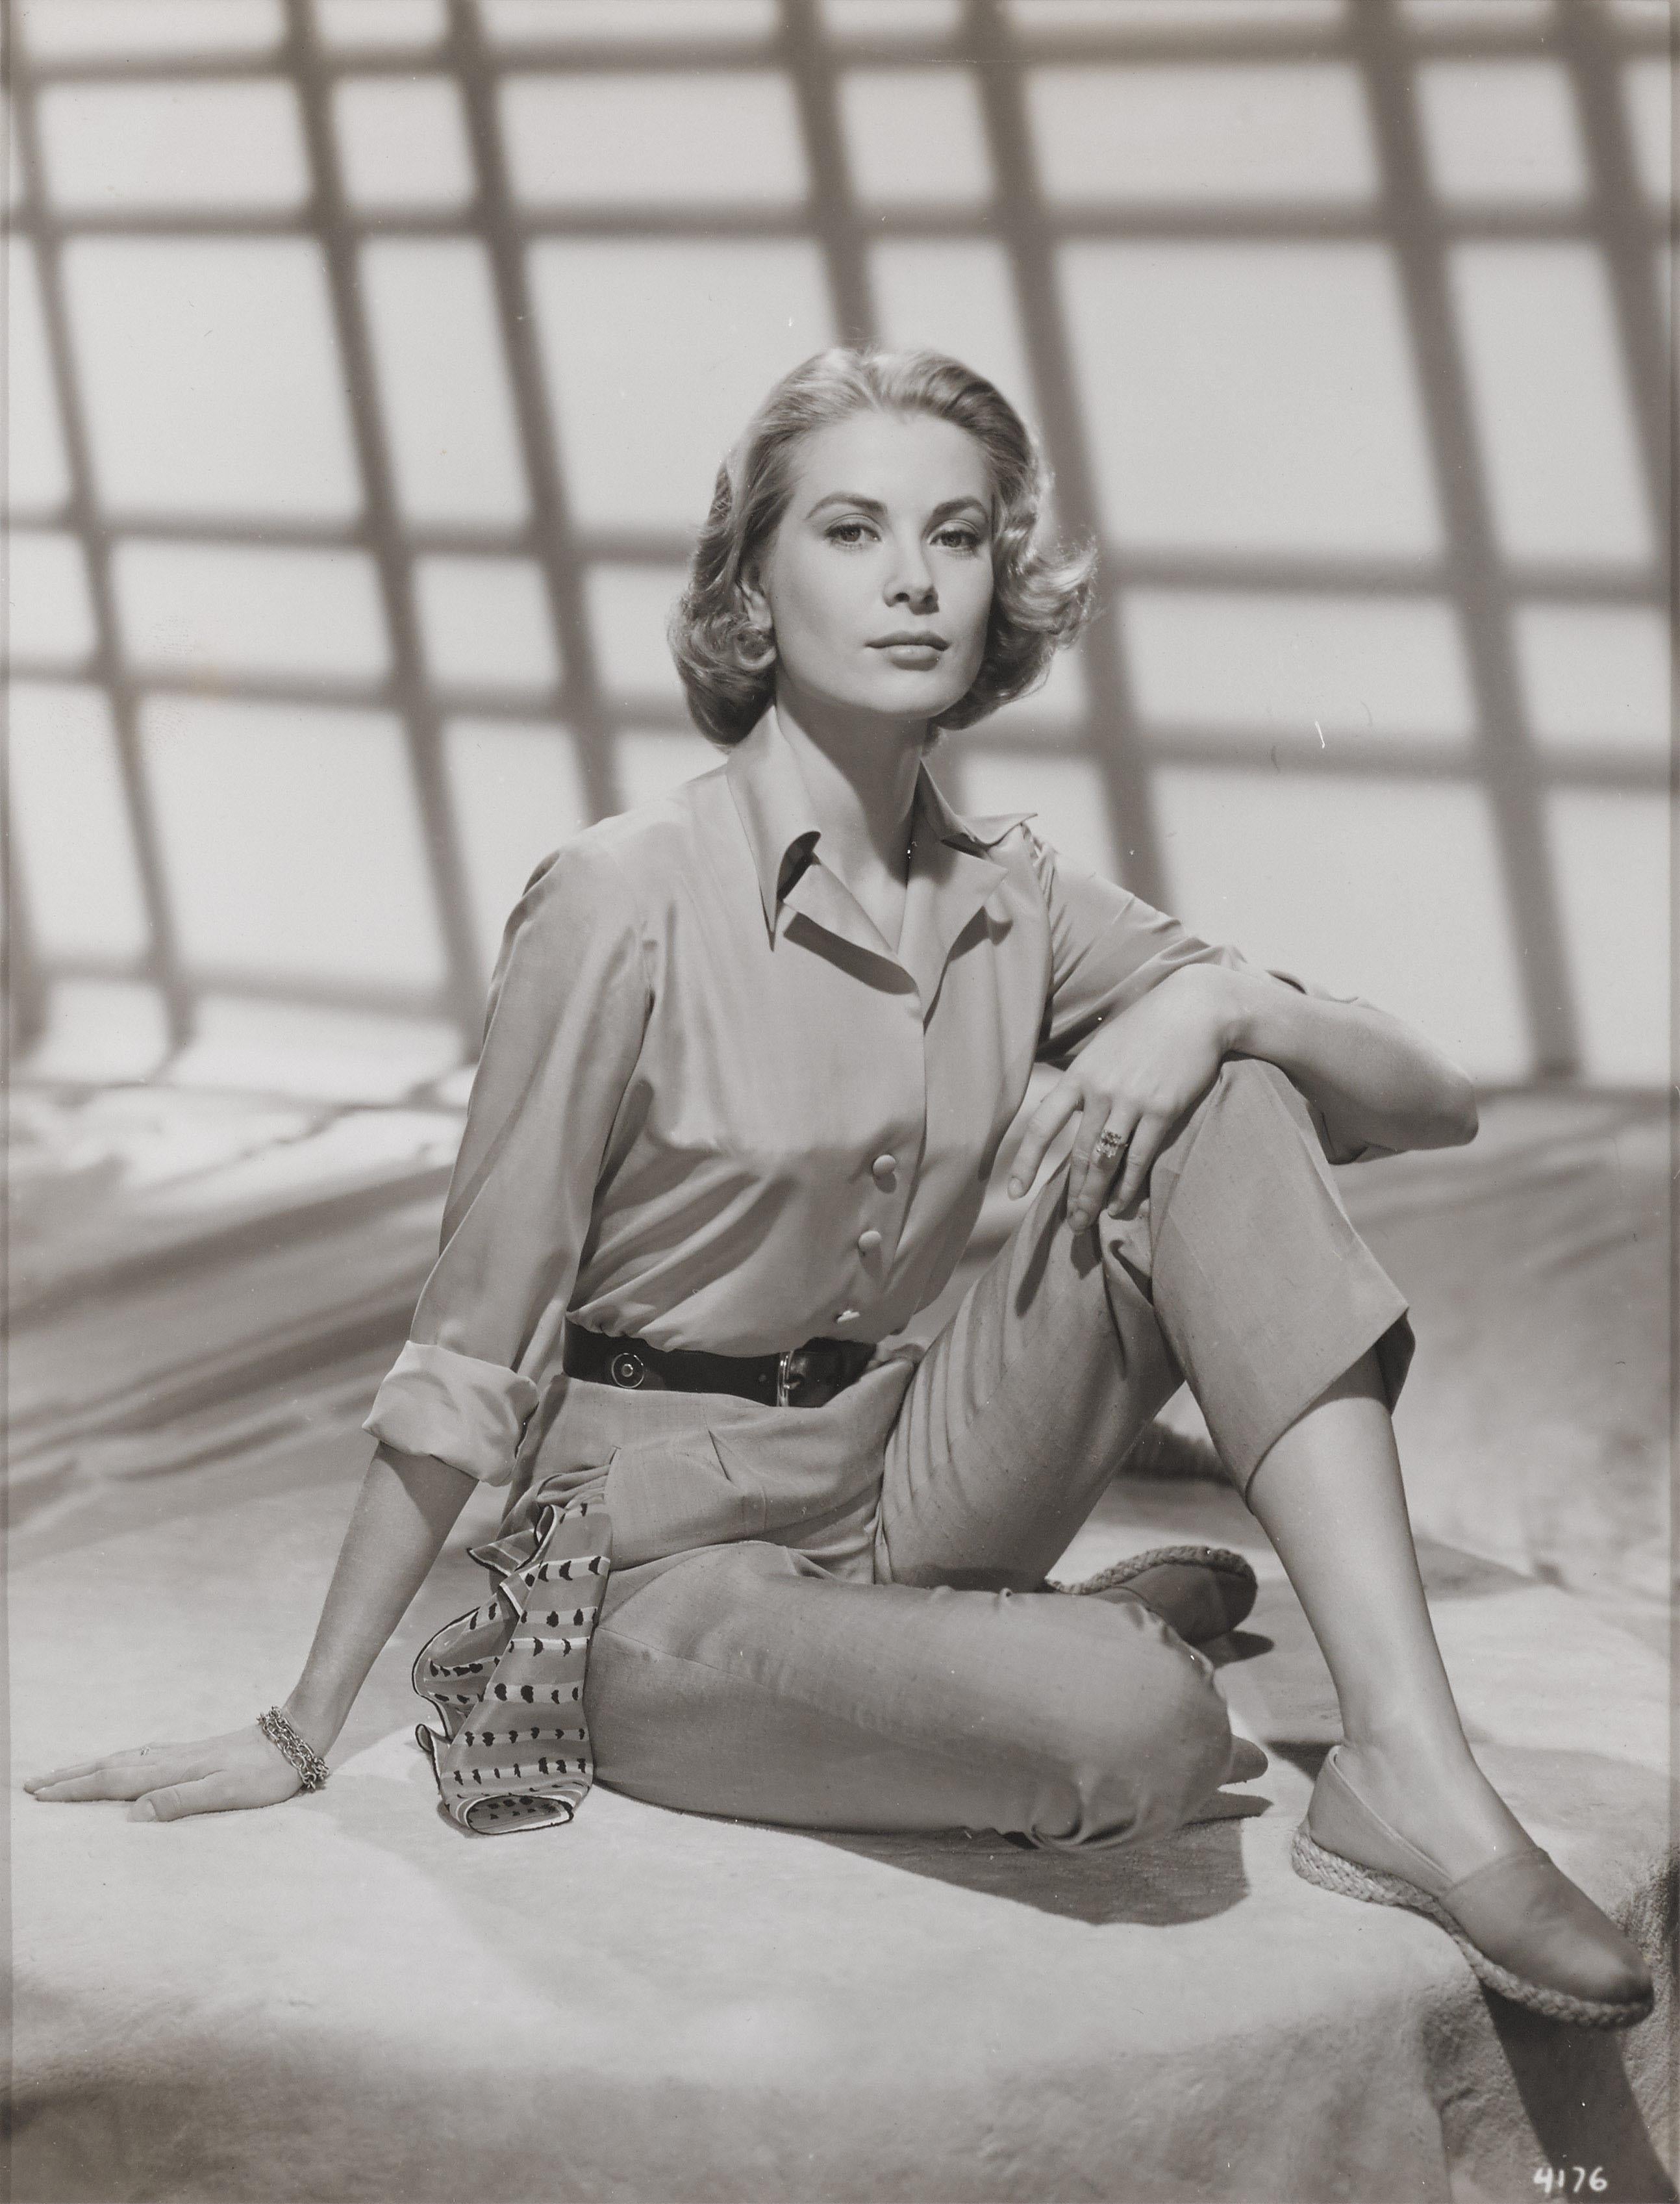 Original photographic MGM glamour fashion portrait of Grace Kelly.
On the reverse of the piece is a stamp with Grace Kelly MGM and a collectors stamp. This information can be seen through the perspex window on the back of the frame.
This piece is